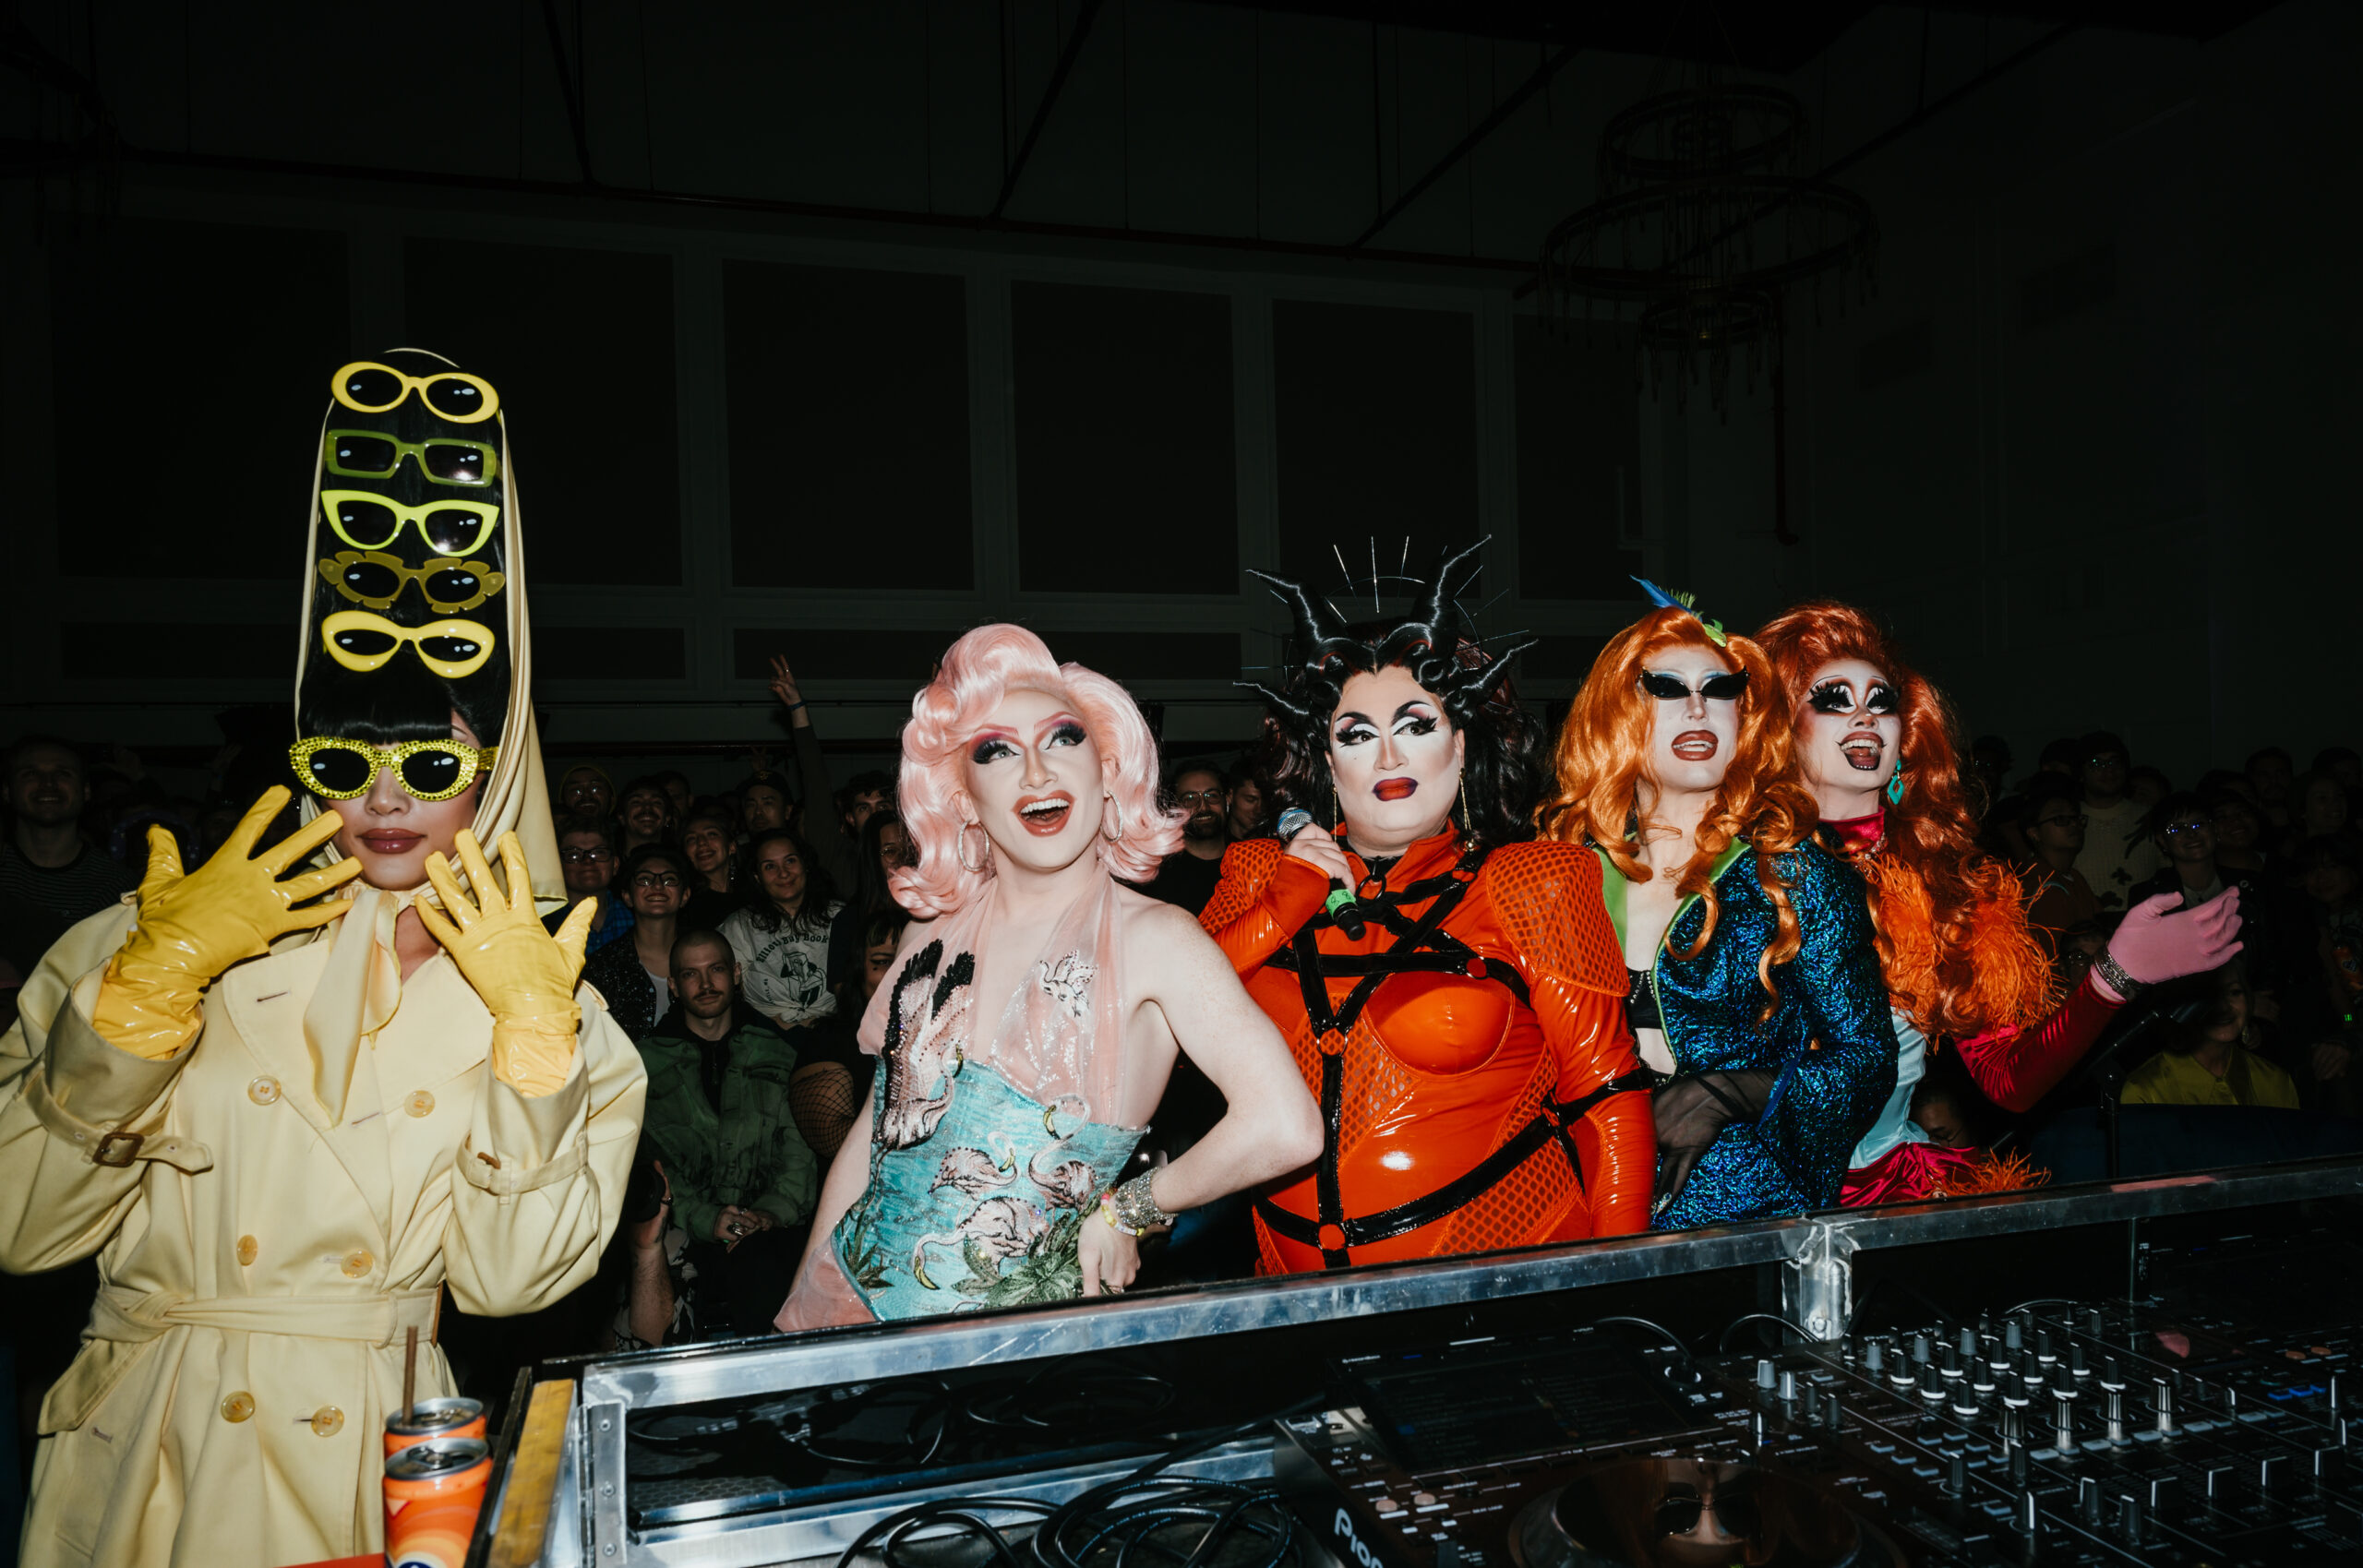 Five drag performers in colorful, elaborate costumes and wigs stand behind a DJ set in a dark venue with an audience in the background.